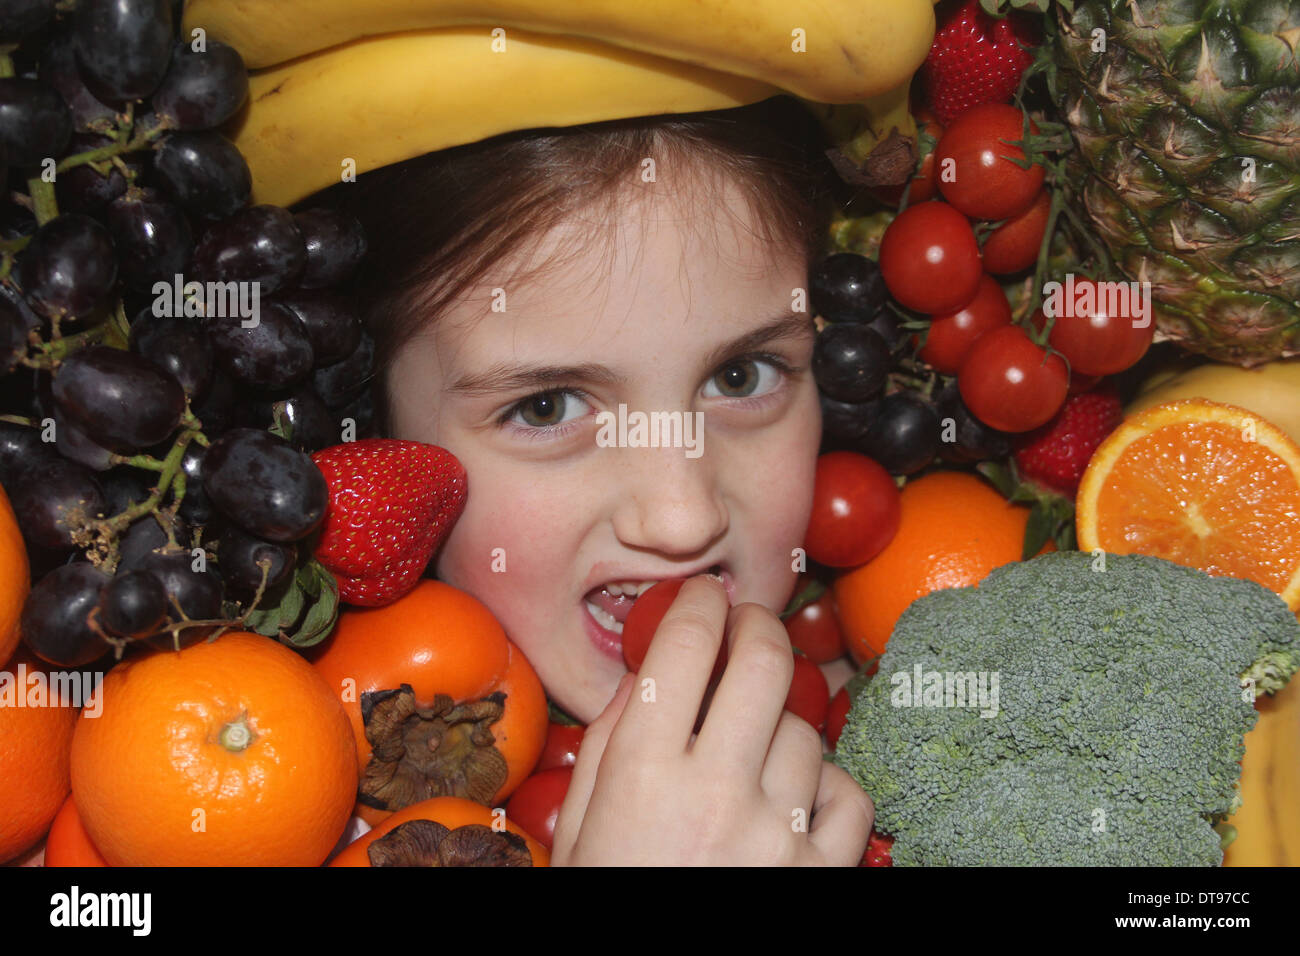 Young caucasian girl's face surrounded by fruit and vegetables eating an apple, five a day, England, UK Stock Photo